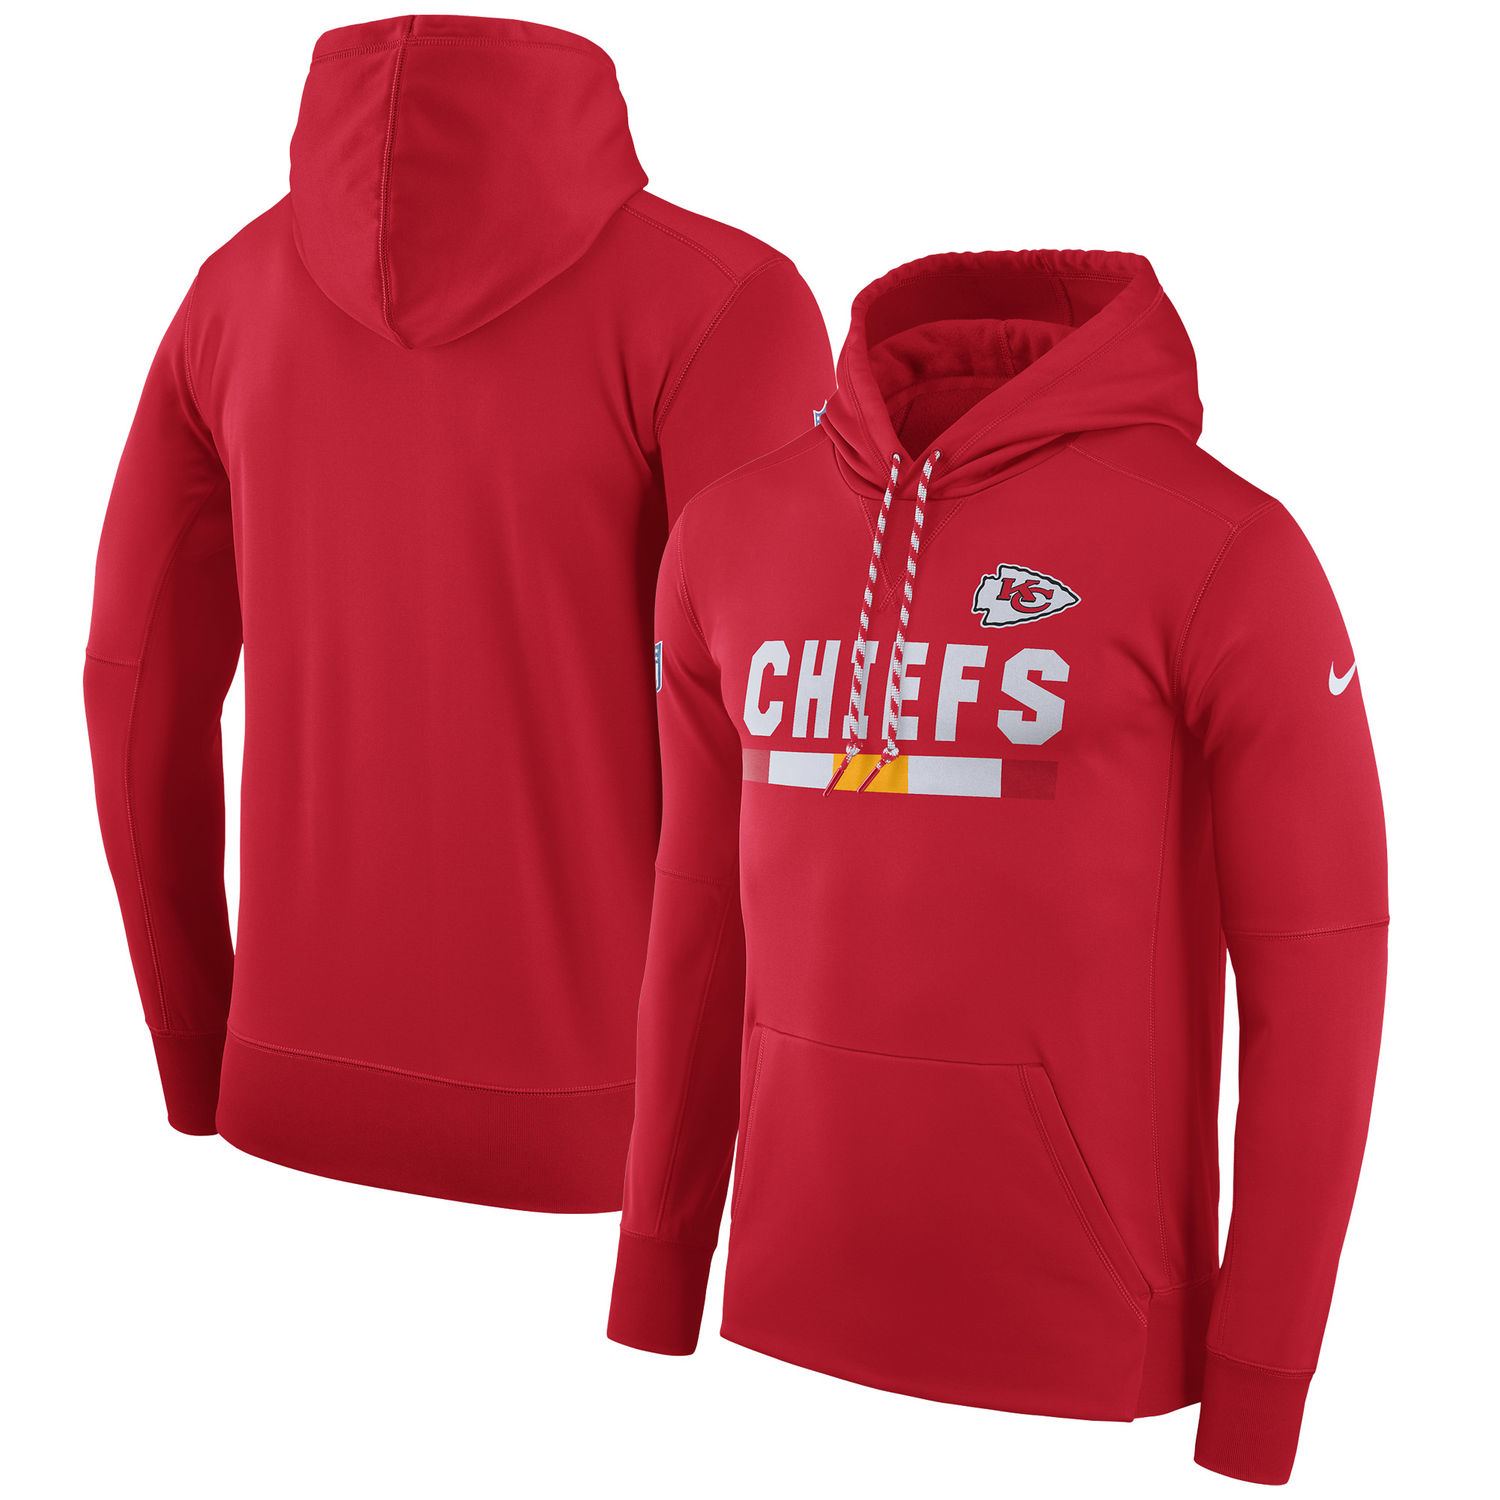 Mens Kansas City Chiefs Nike Red Sideline Team Name Performance Pullover Hoodie